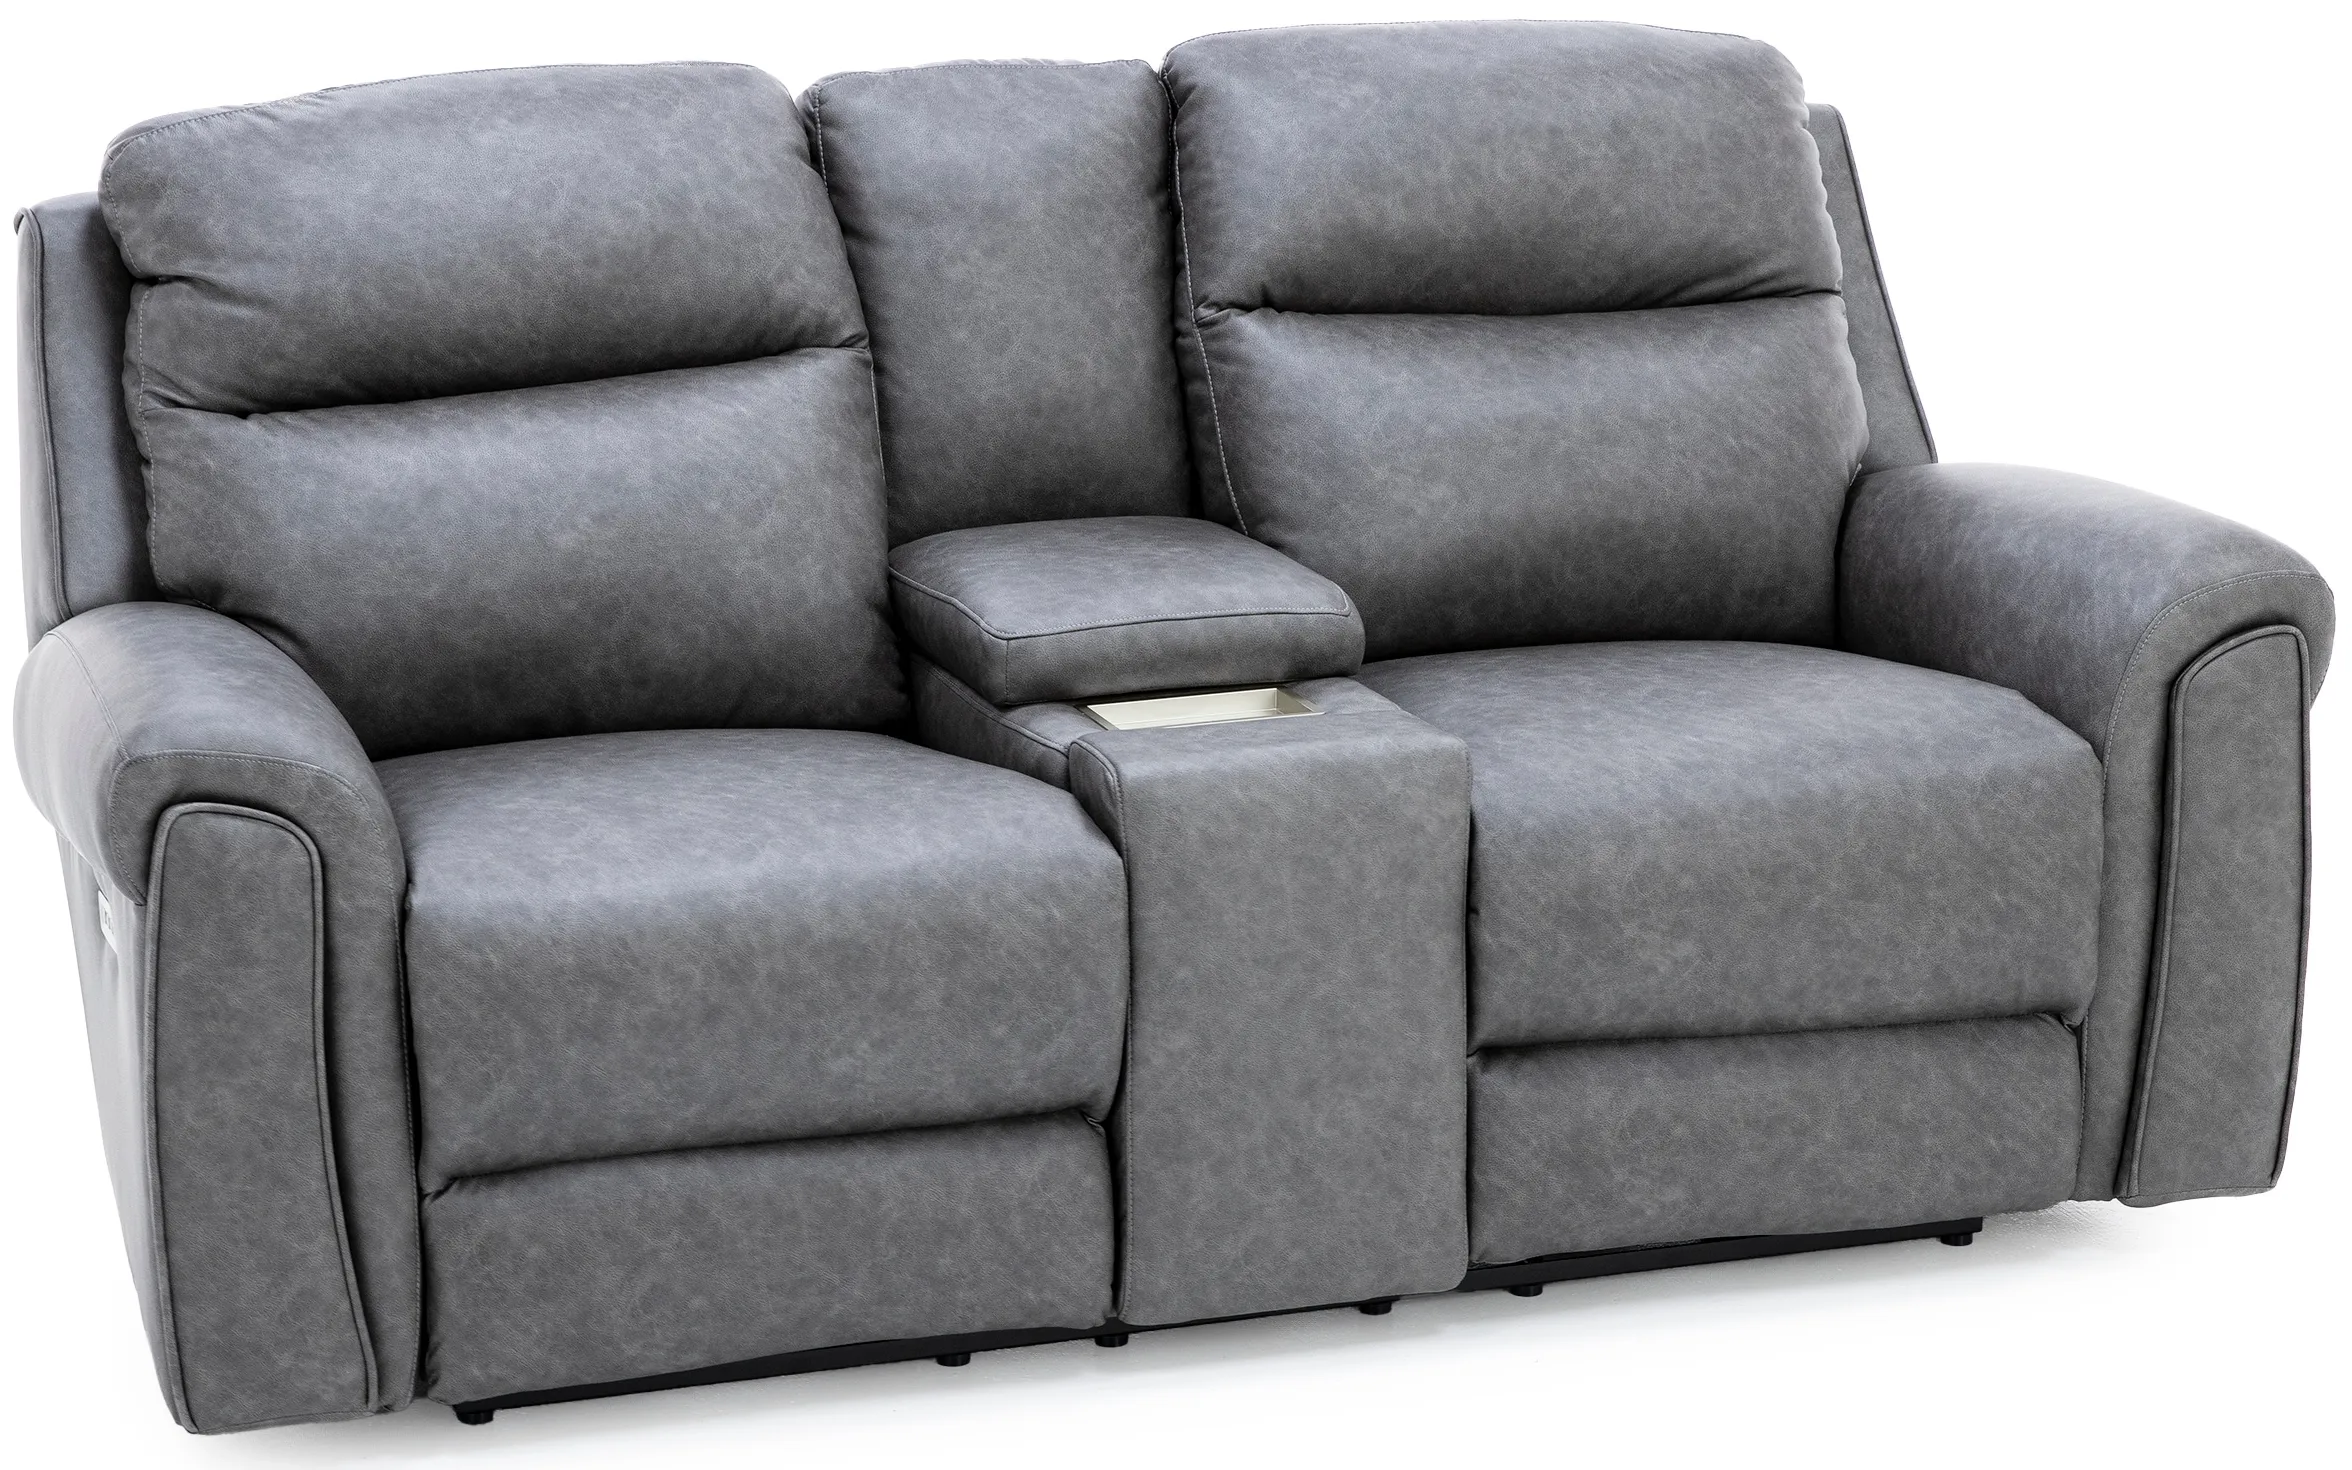 Nottingham Fully Loaded Reclining Wall Saver Console Loveseat with Next Level